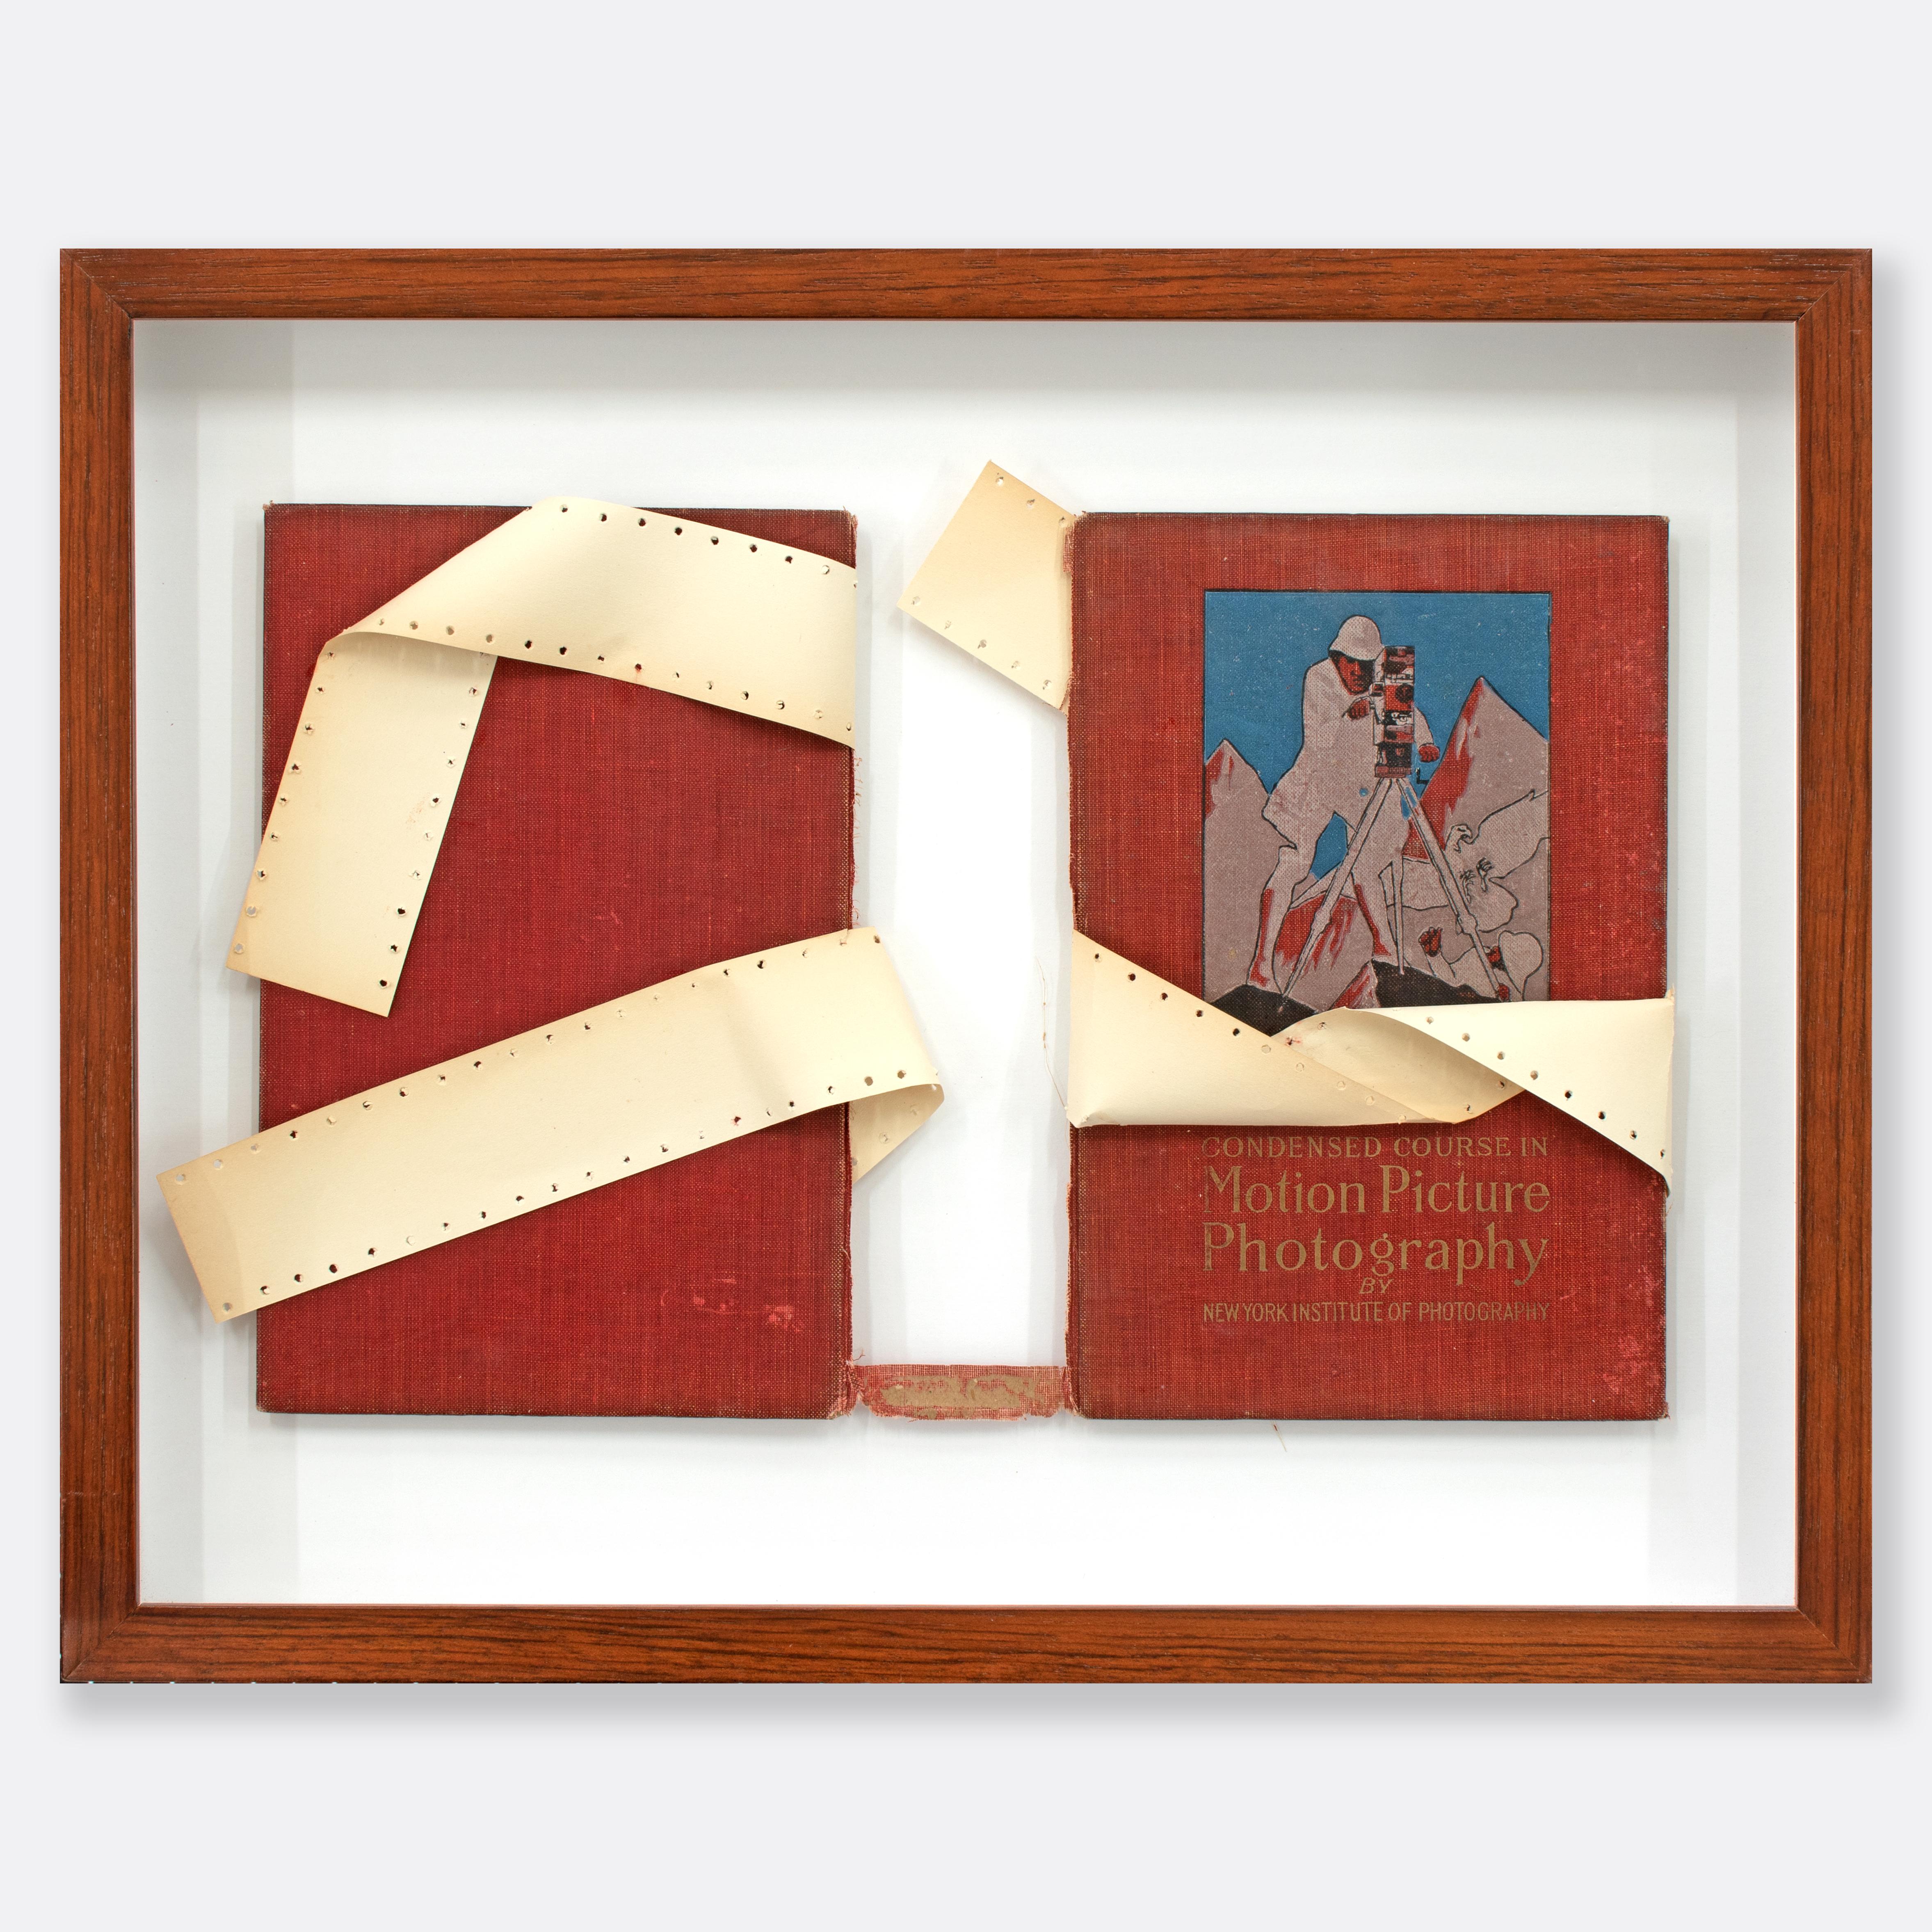 Motion Picture Photography - abstract book art mixed media in handmade frame - Mixed Media Art by Austin Kerr